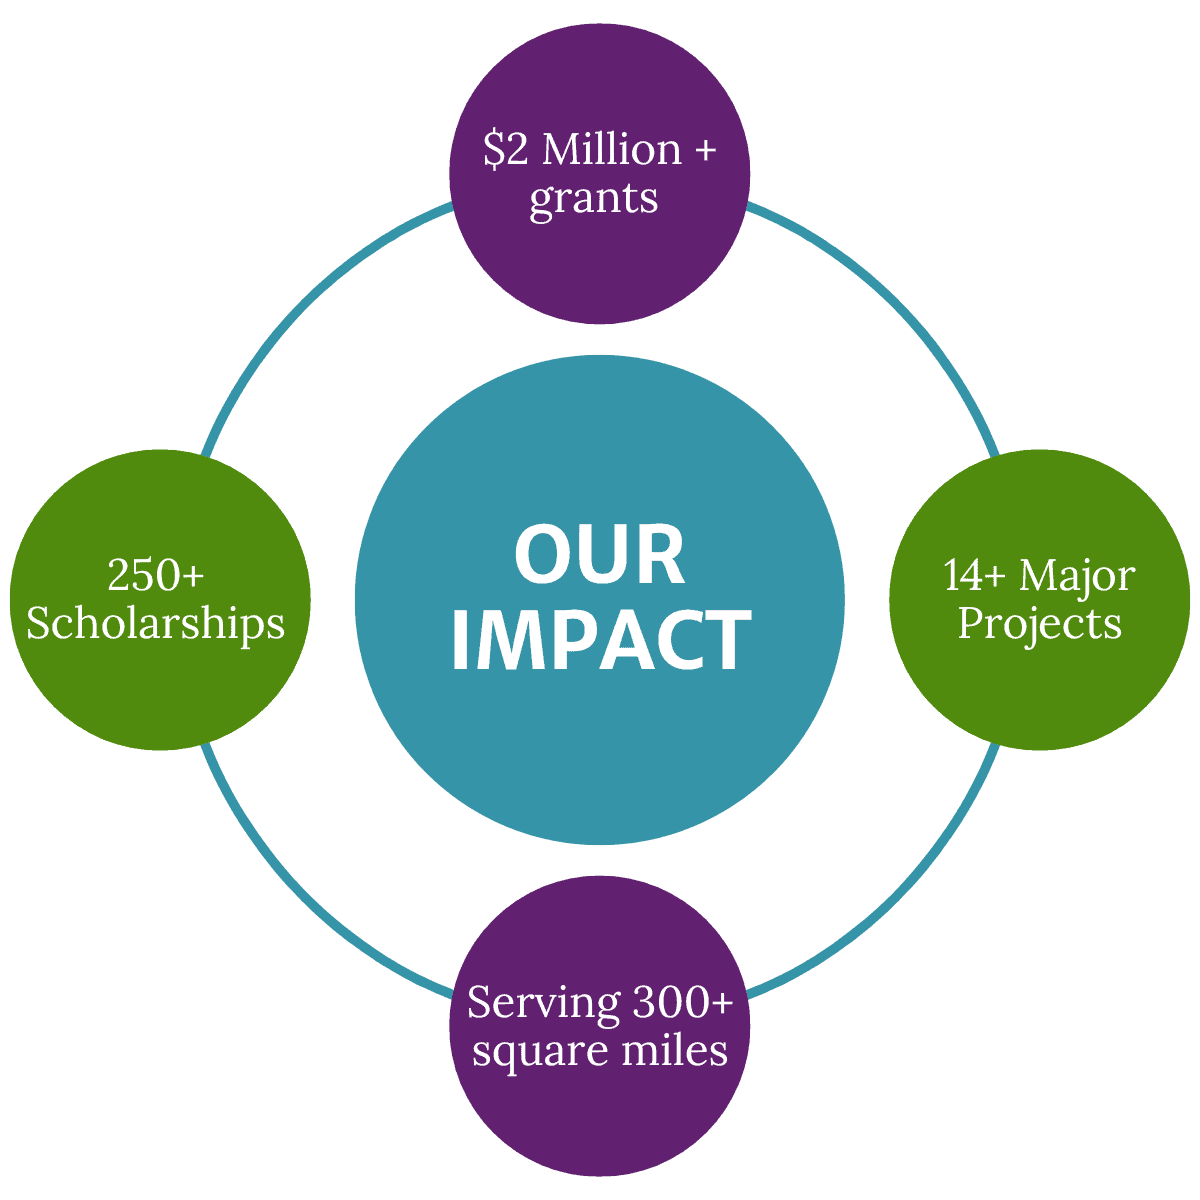 Circular graphic with the following text: Our Impact: $2 Million + grants, 14+ Major Projects, 250+ Scholarships, Serving 300+ square miles